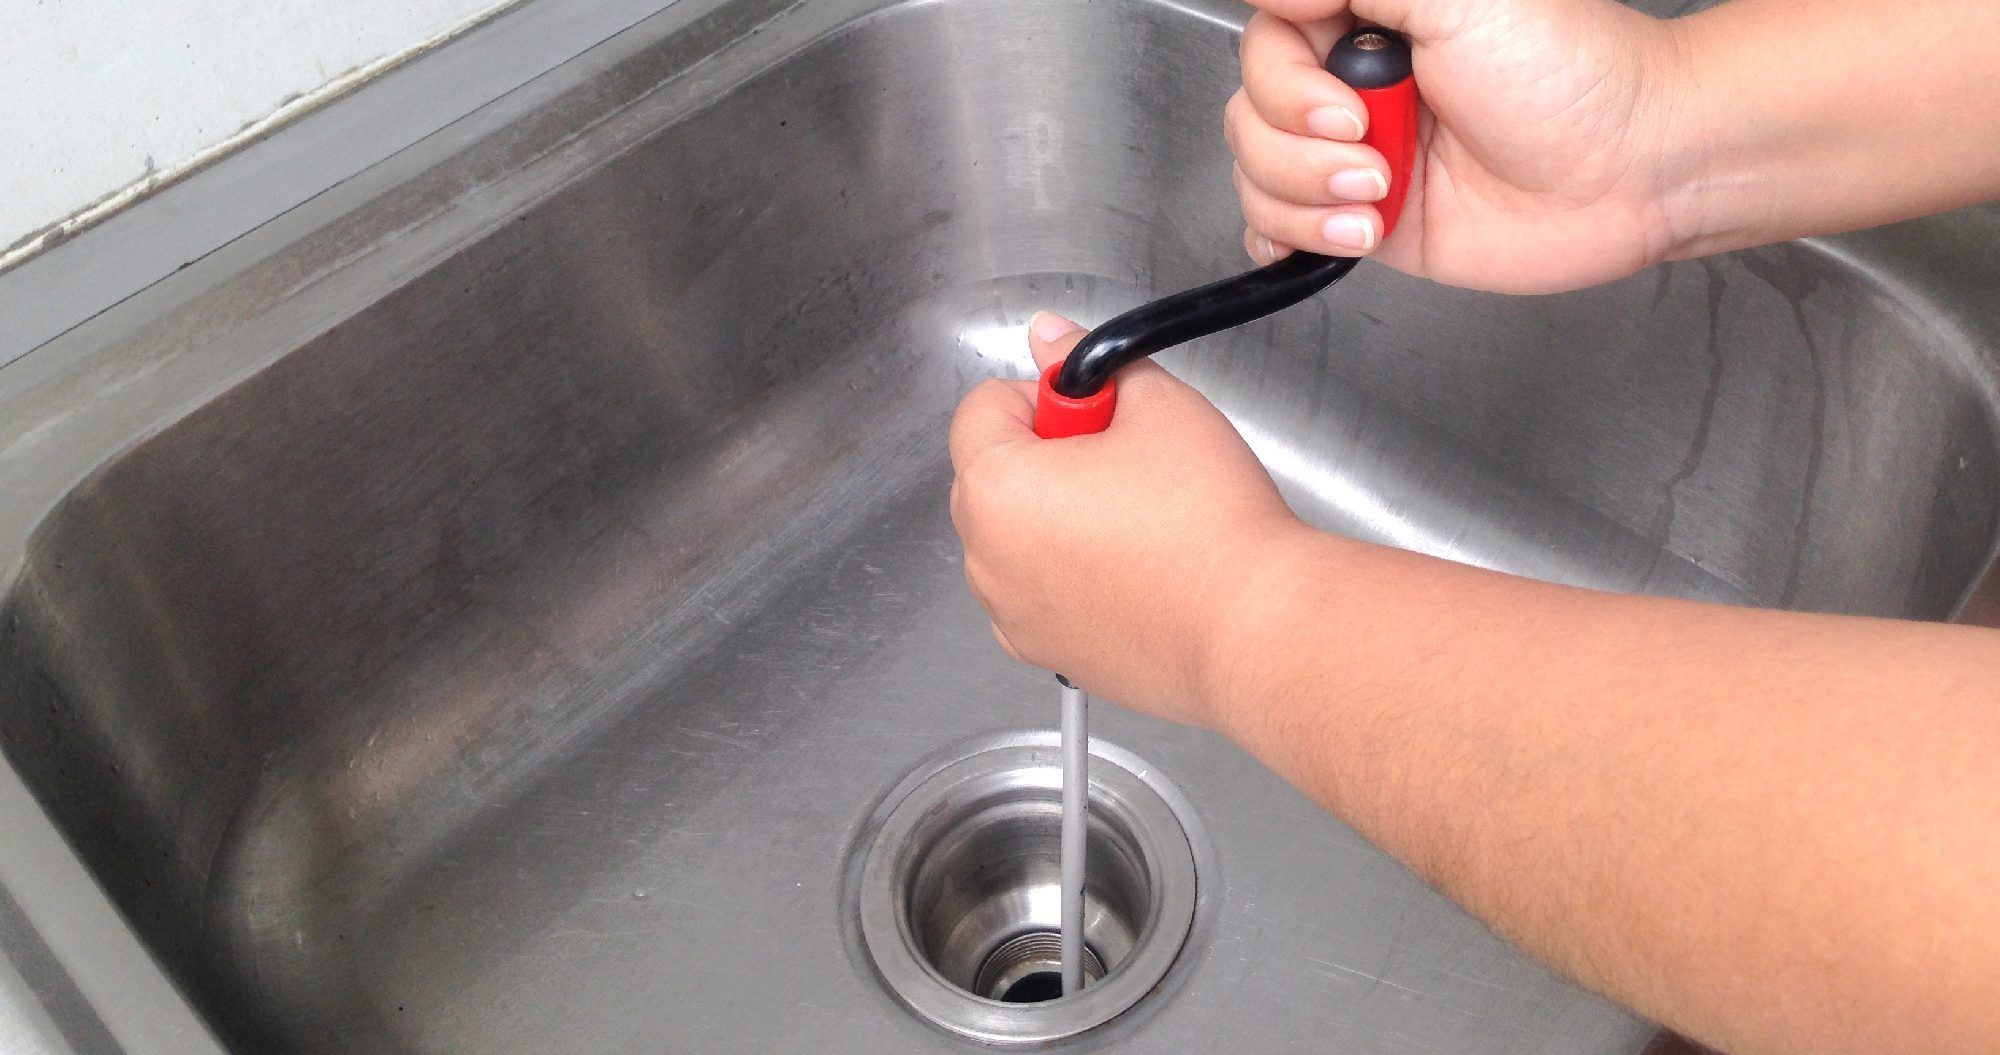 Drain Snakes How To Unclog A Sink, Toilet, or Tub